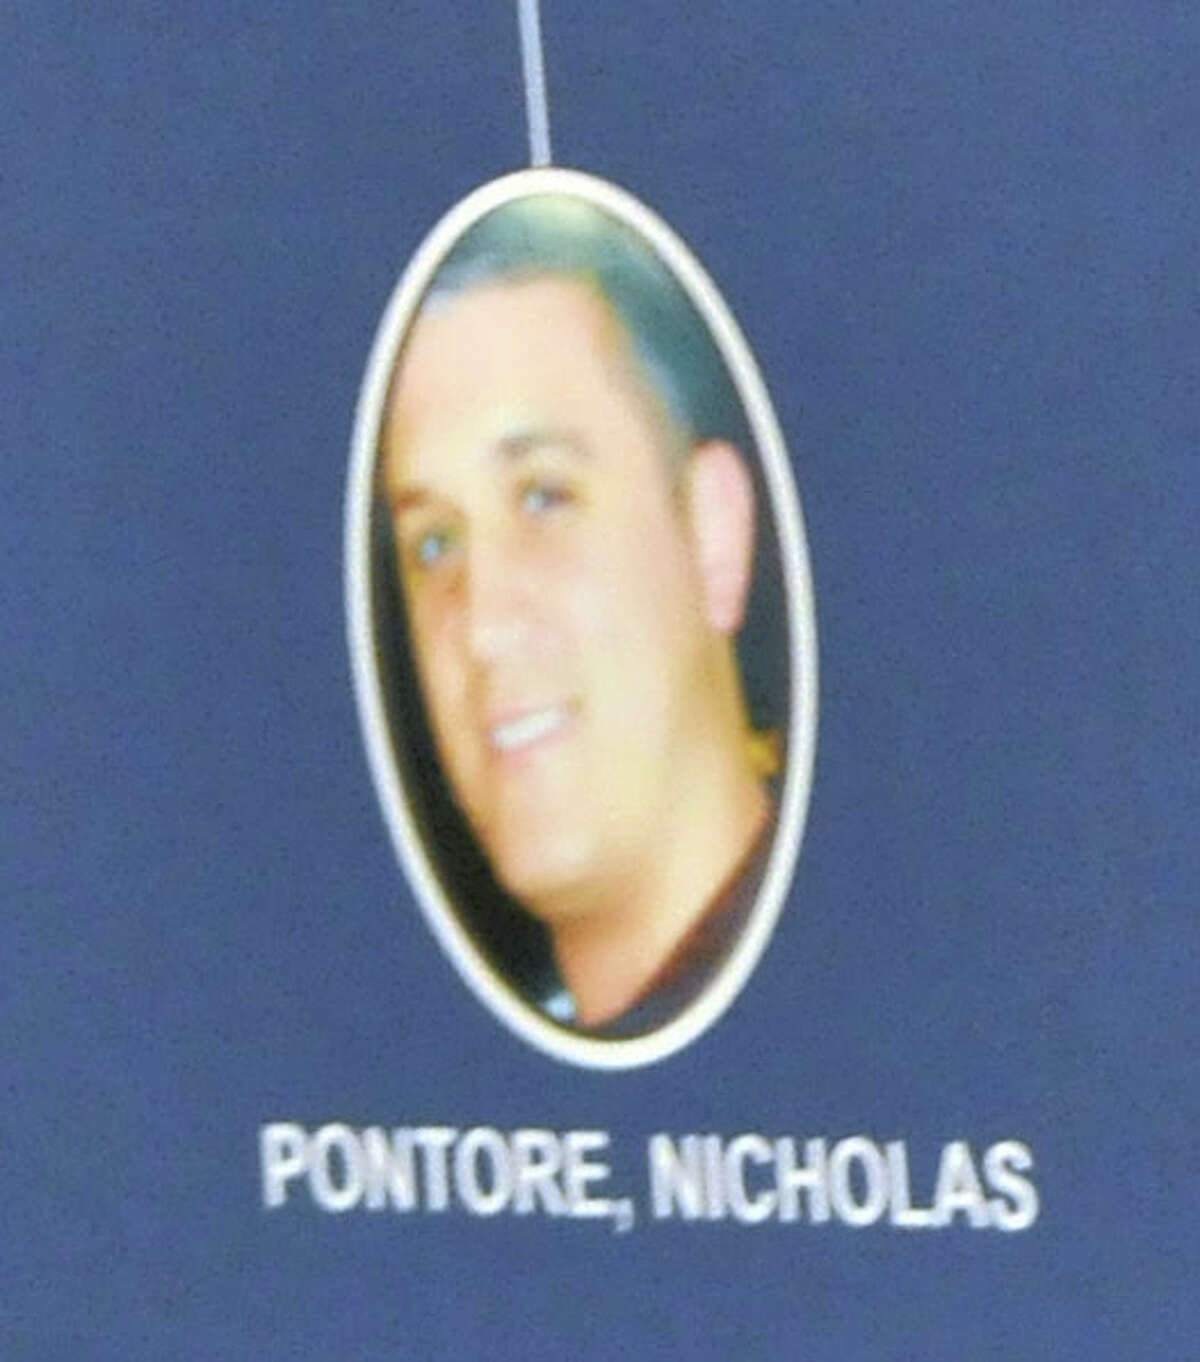 A photo of Nicholas Pontore is displayed during a press conference on Tuesday, Aug. 4, 2015, at The New York State Police Academy in Albany, N.Y. (Phoebe Sheehan/Times Union archive)